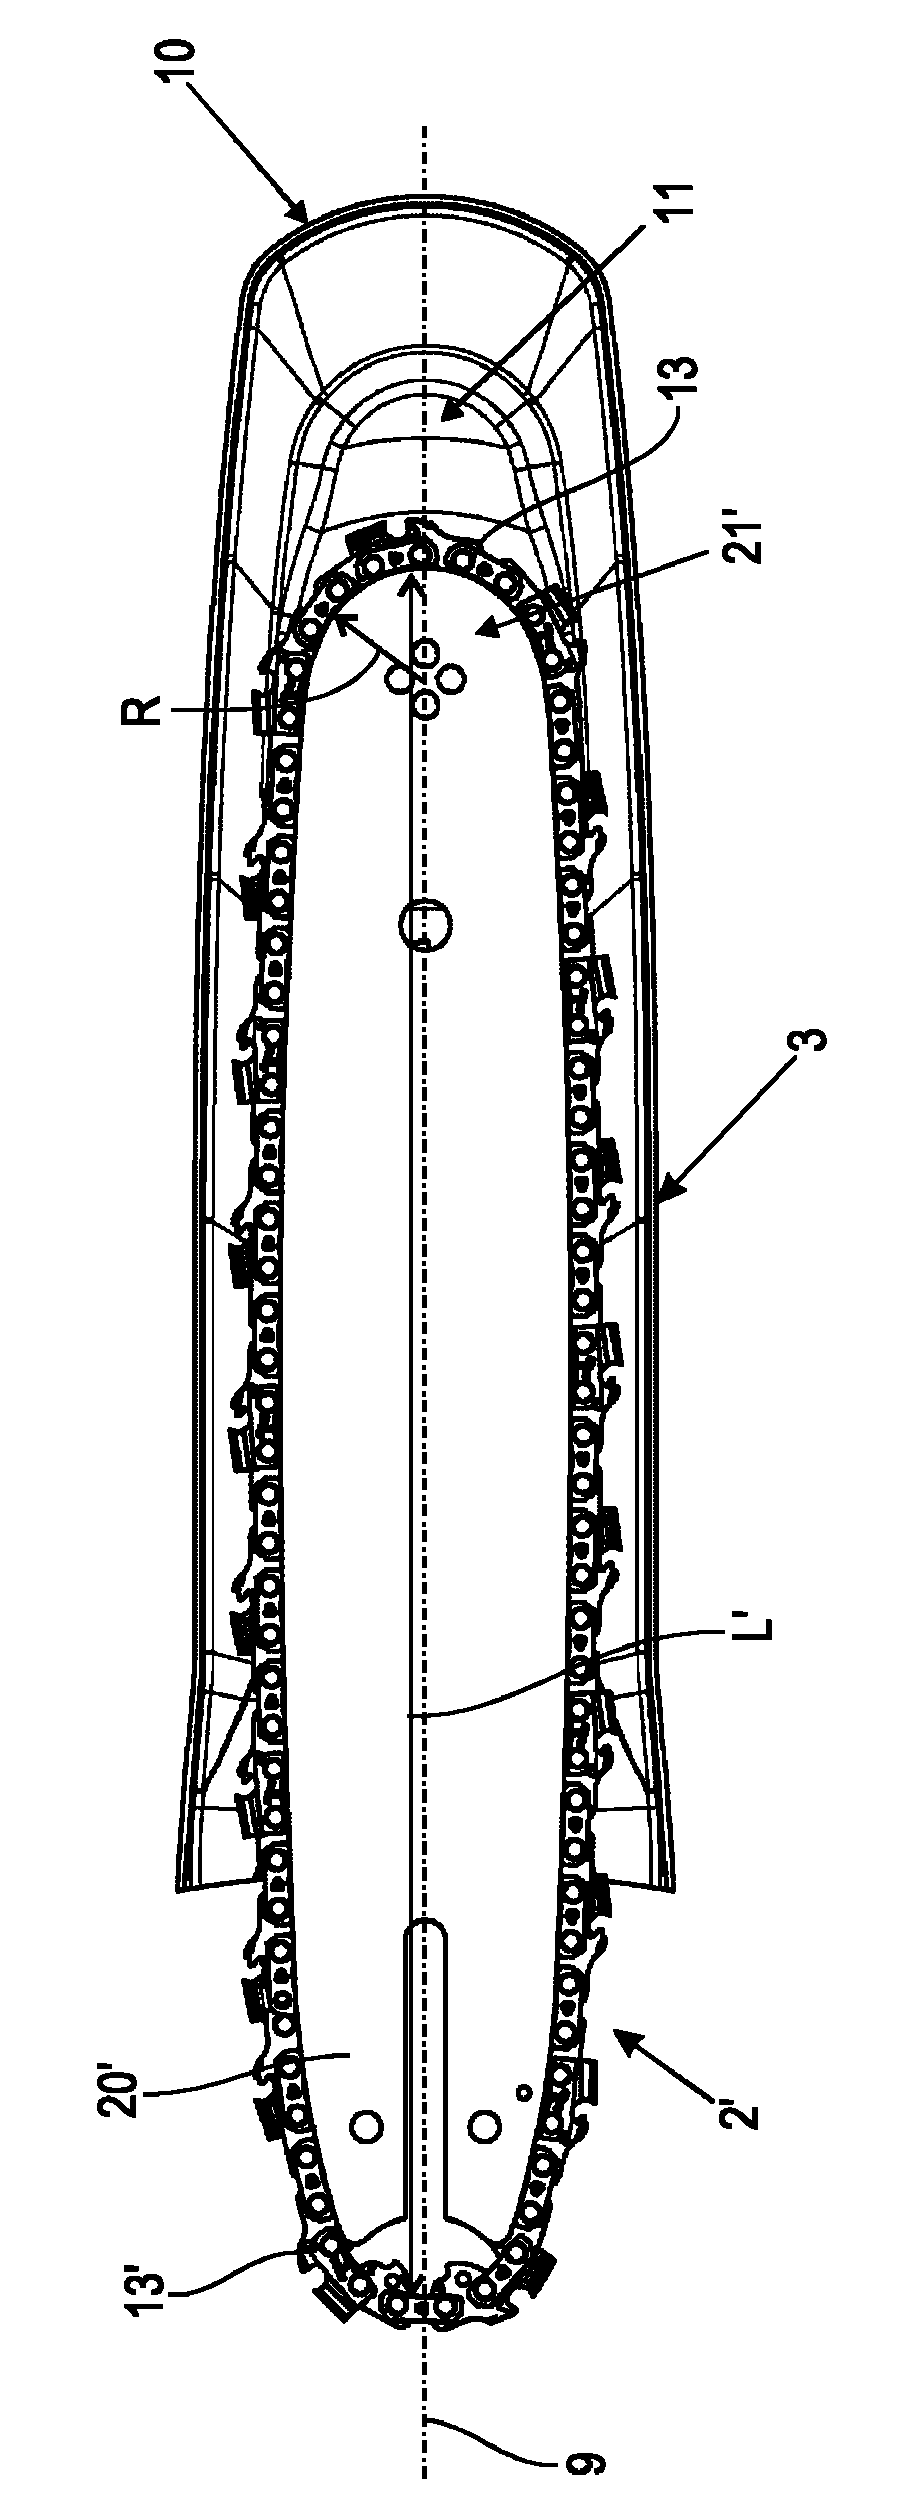 Chain guard and chainsaw system